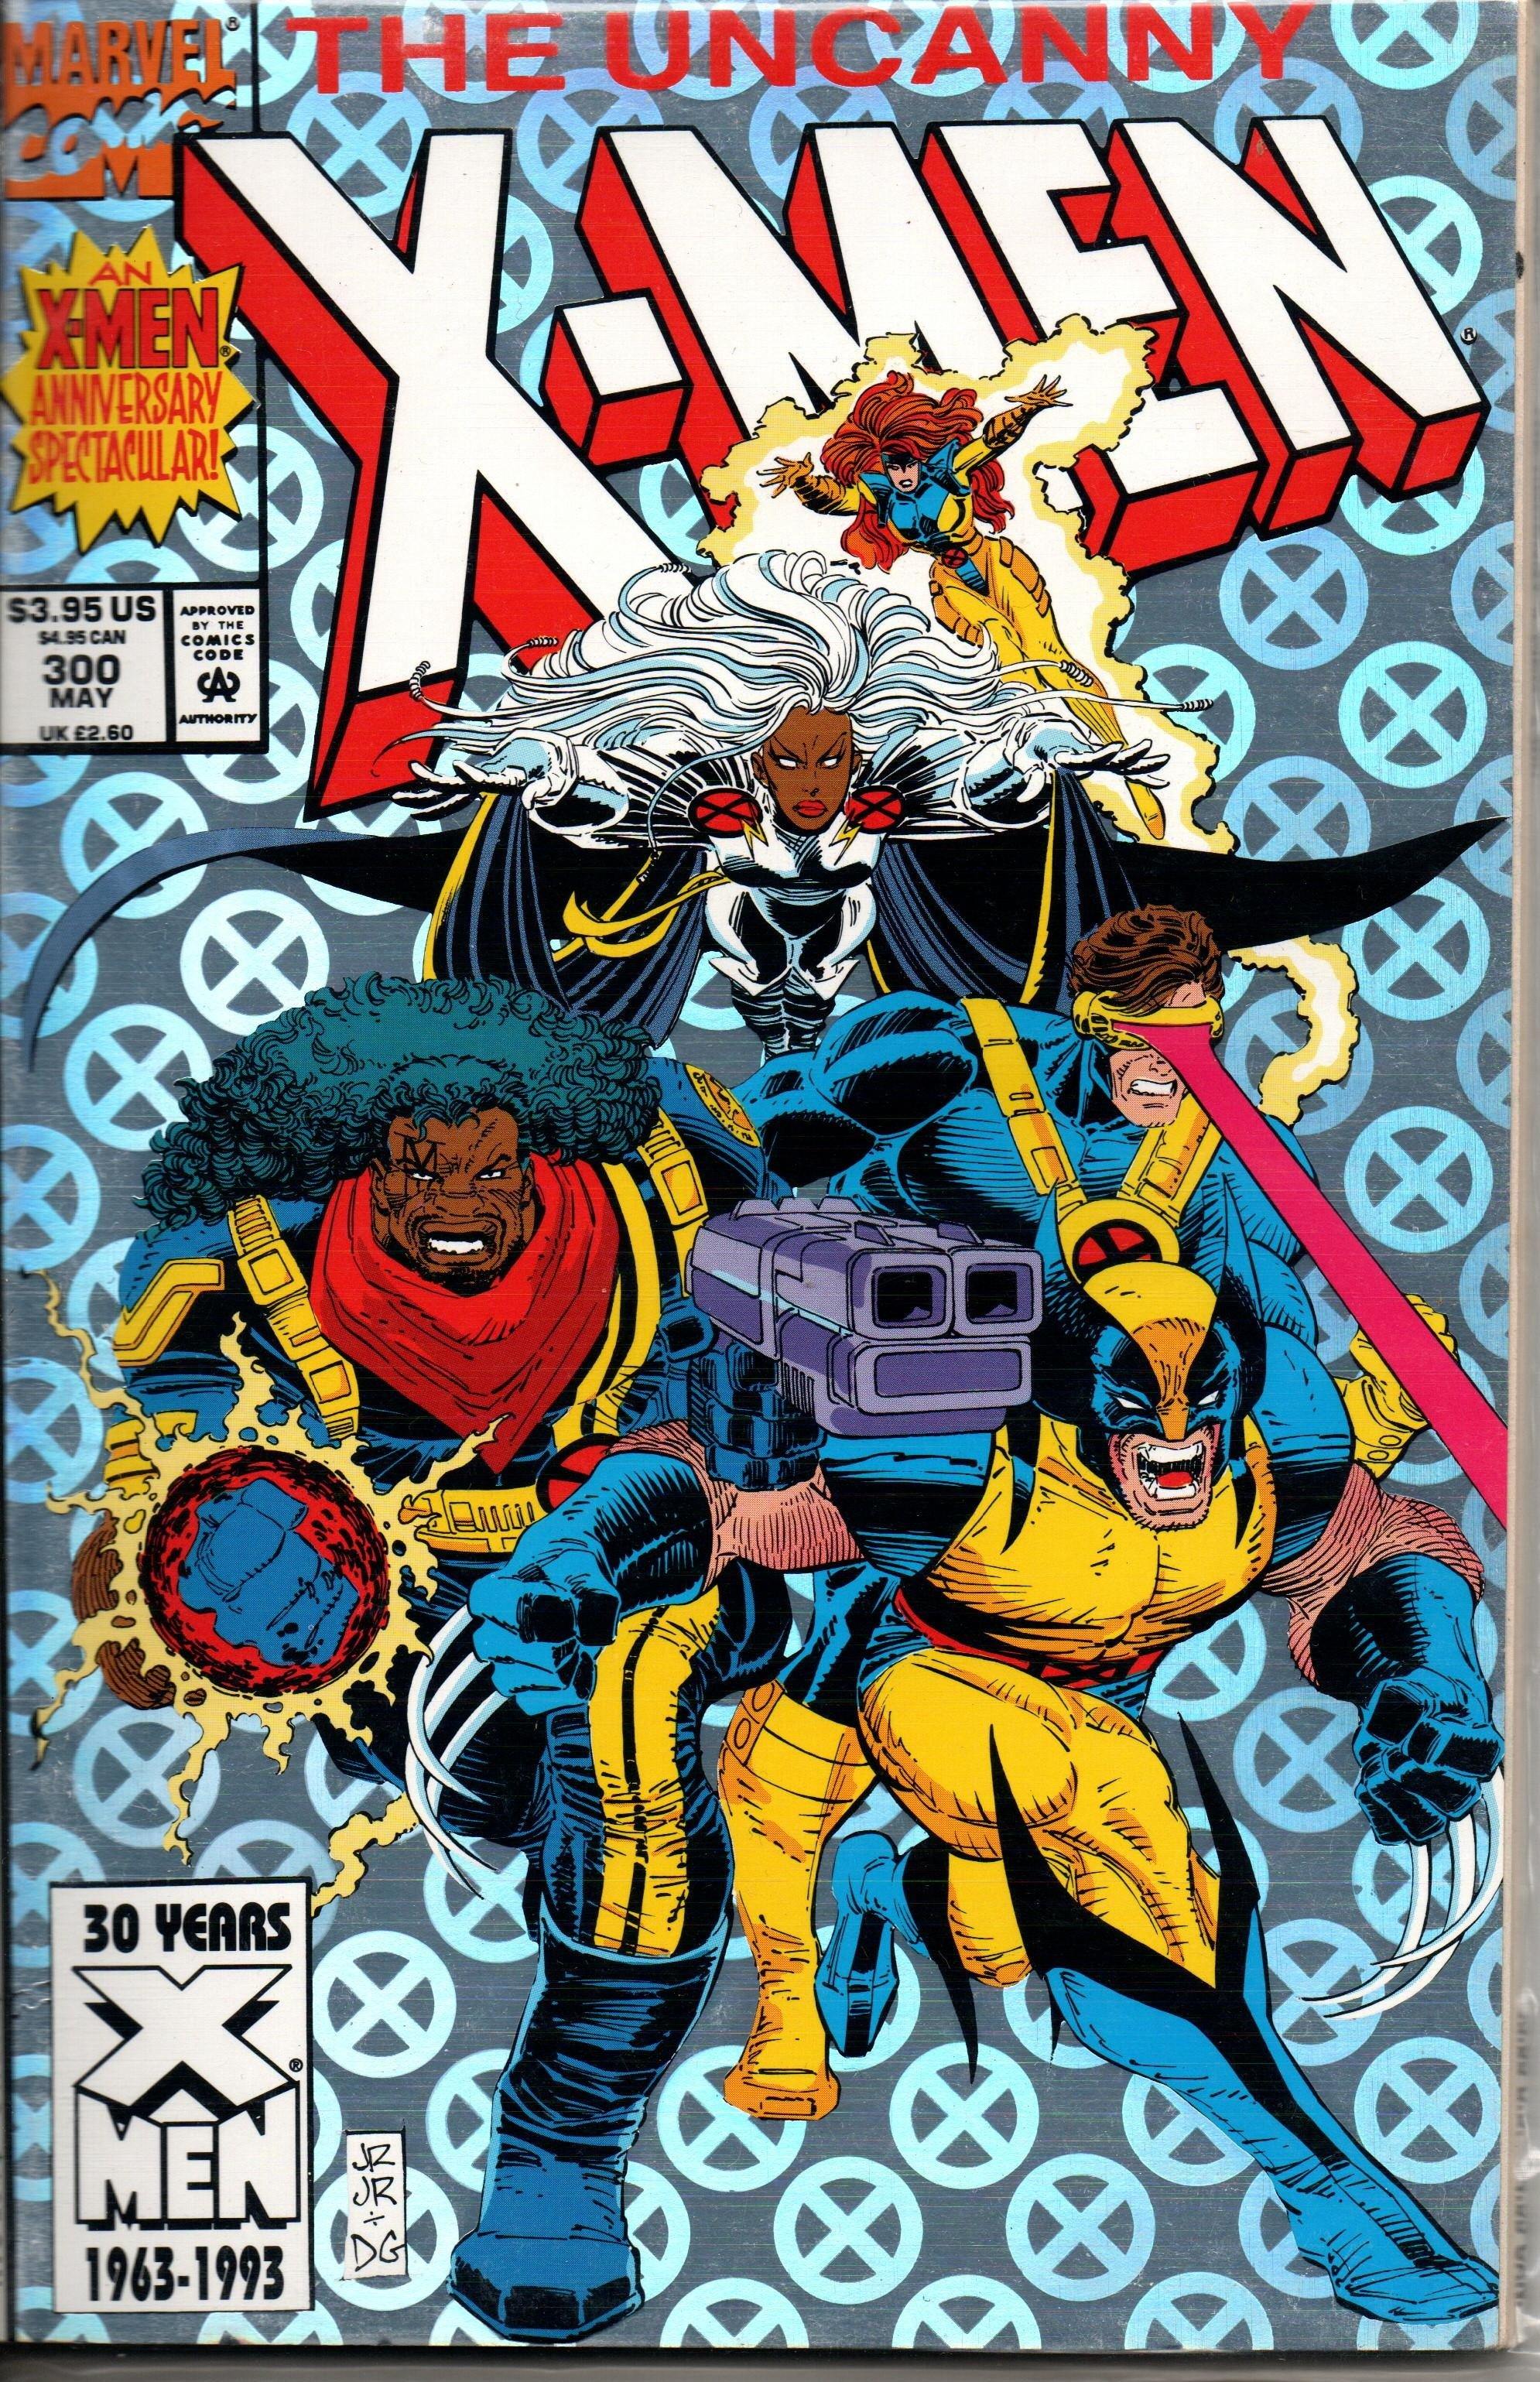 THE UNCANNY X-MEN #300 (1963 1ST SERIES) MAY 1993